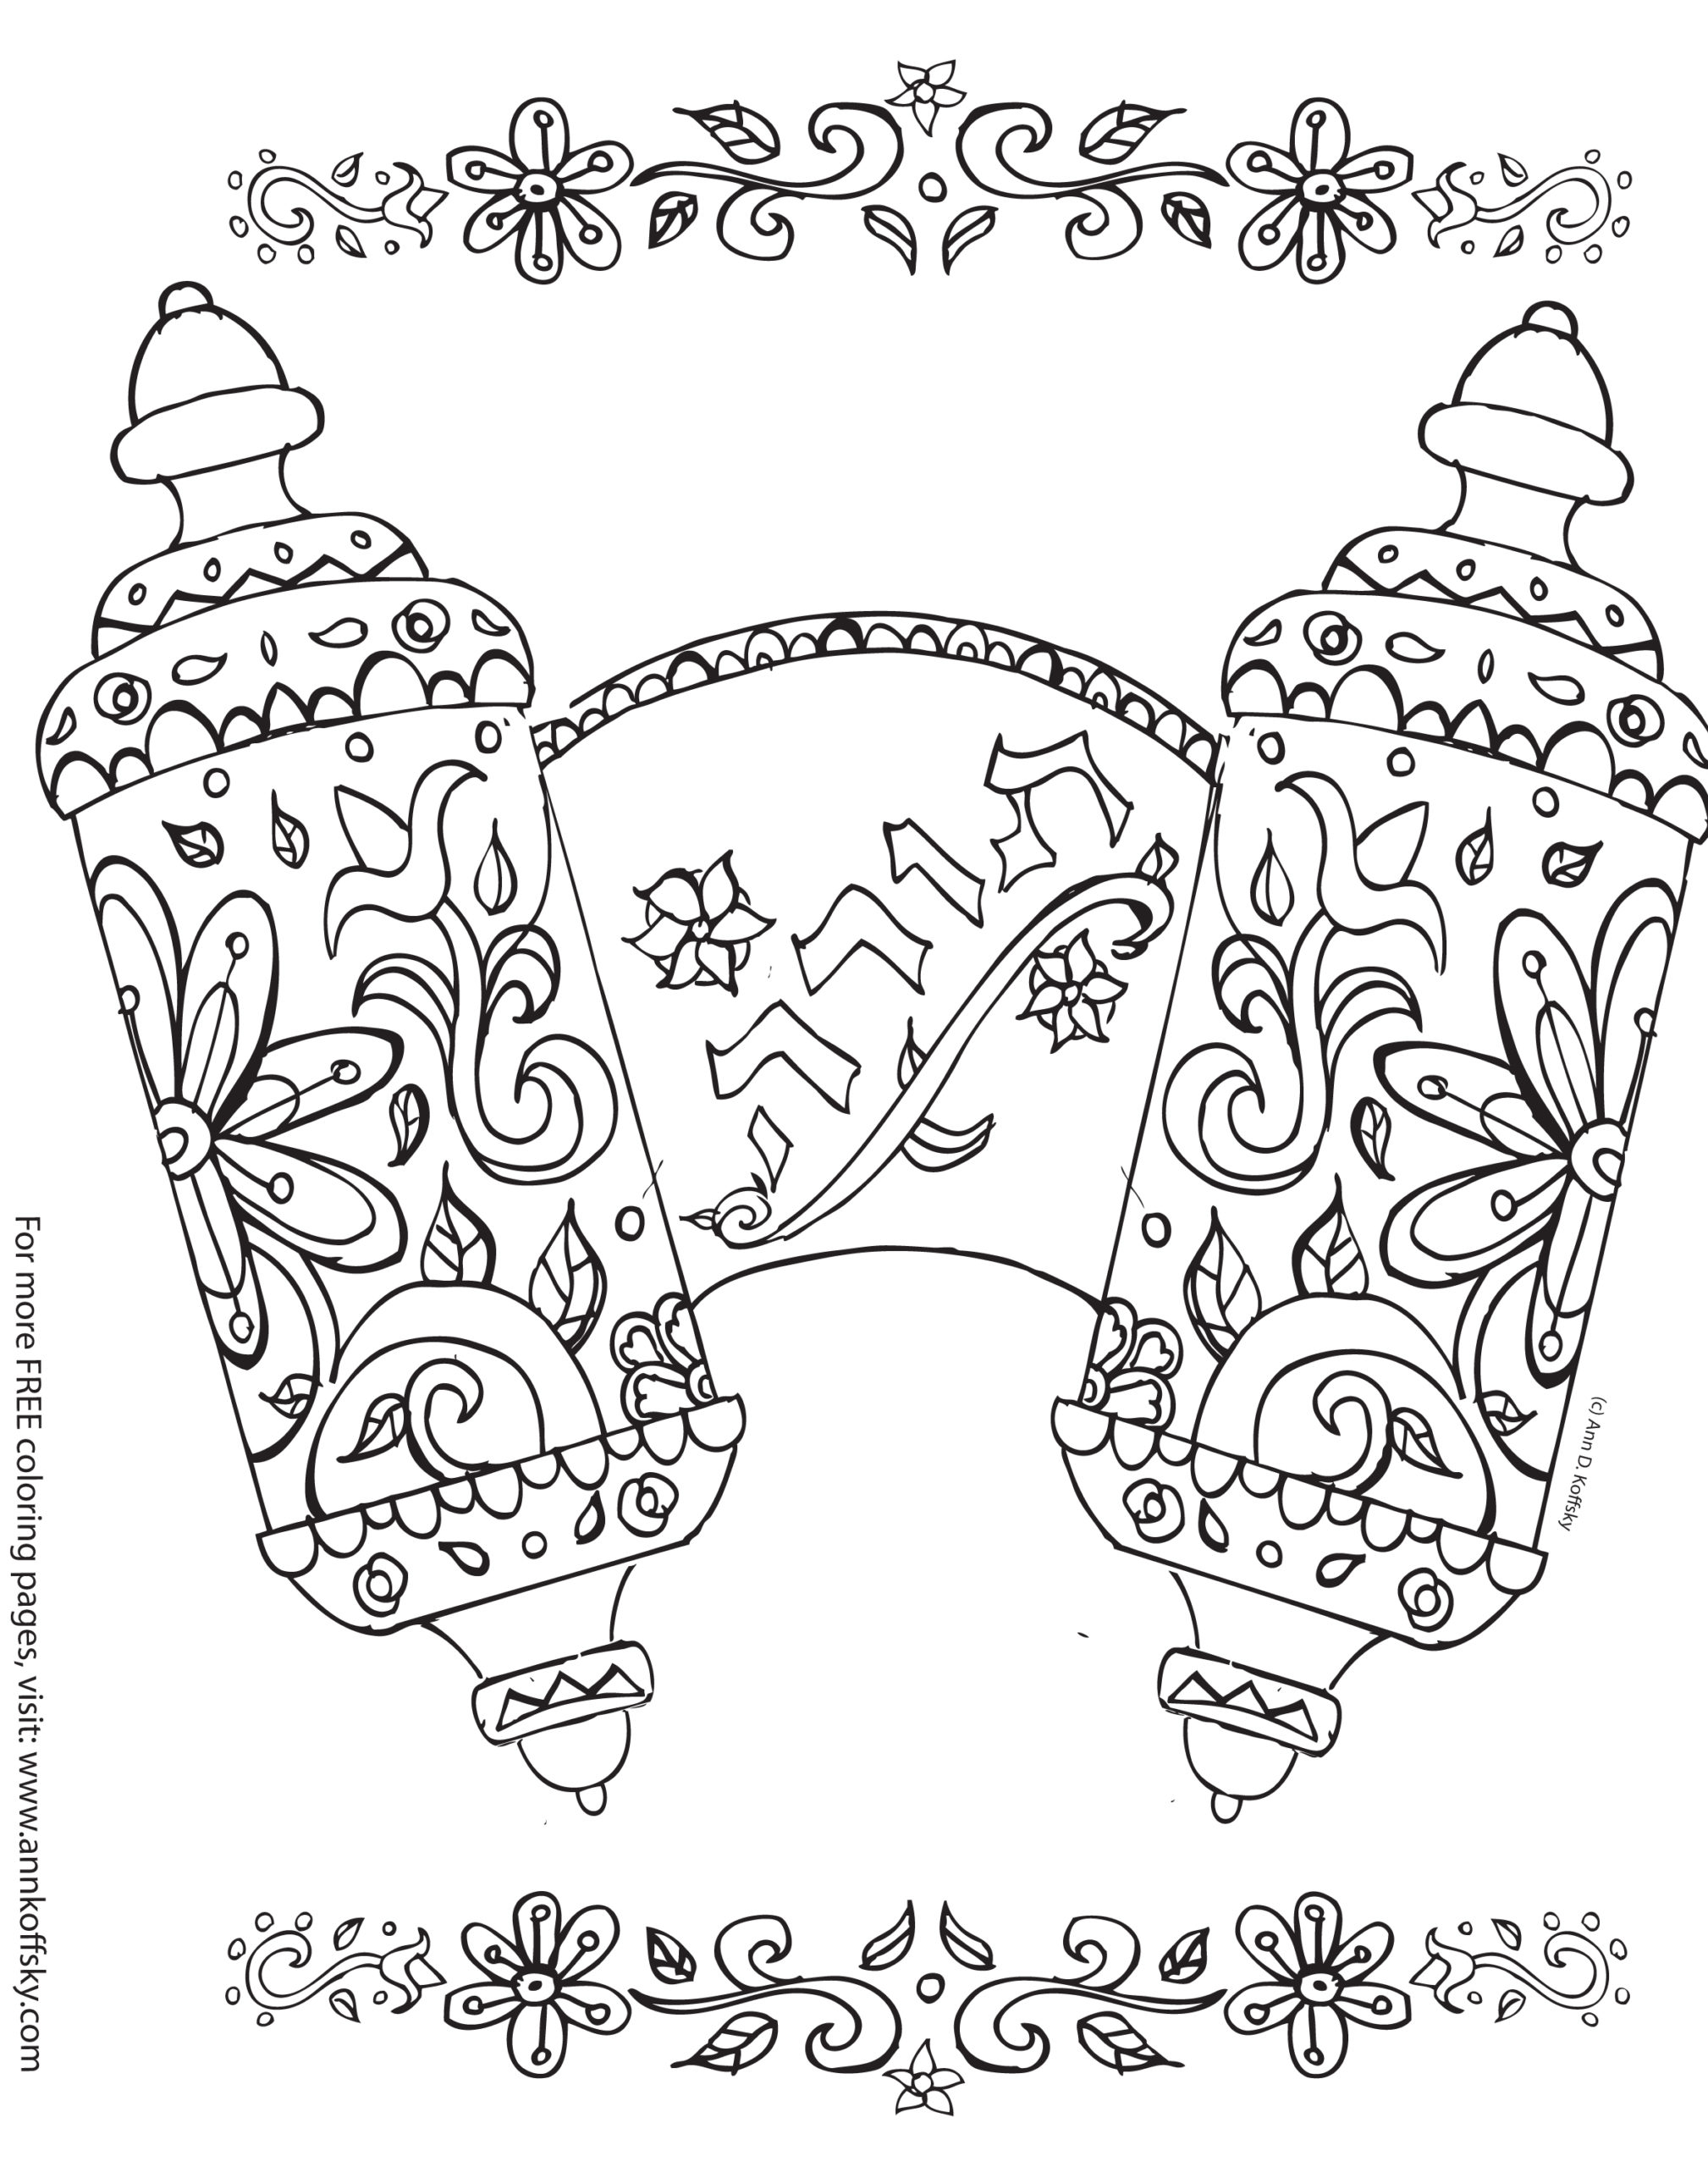 10 FREE Shavuot Coloring Pages & Crafts